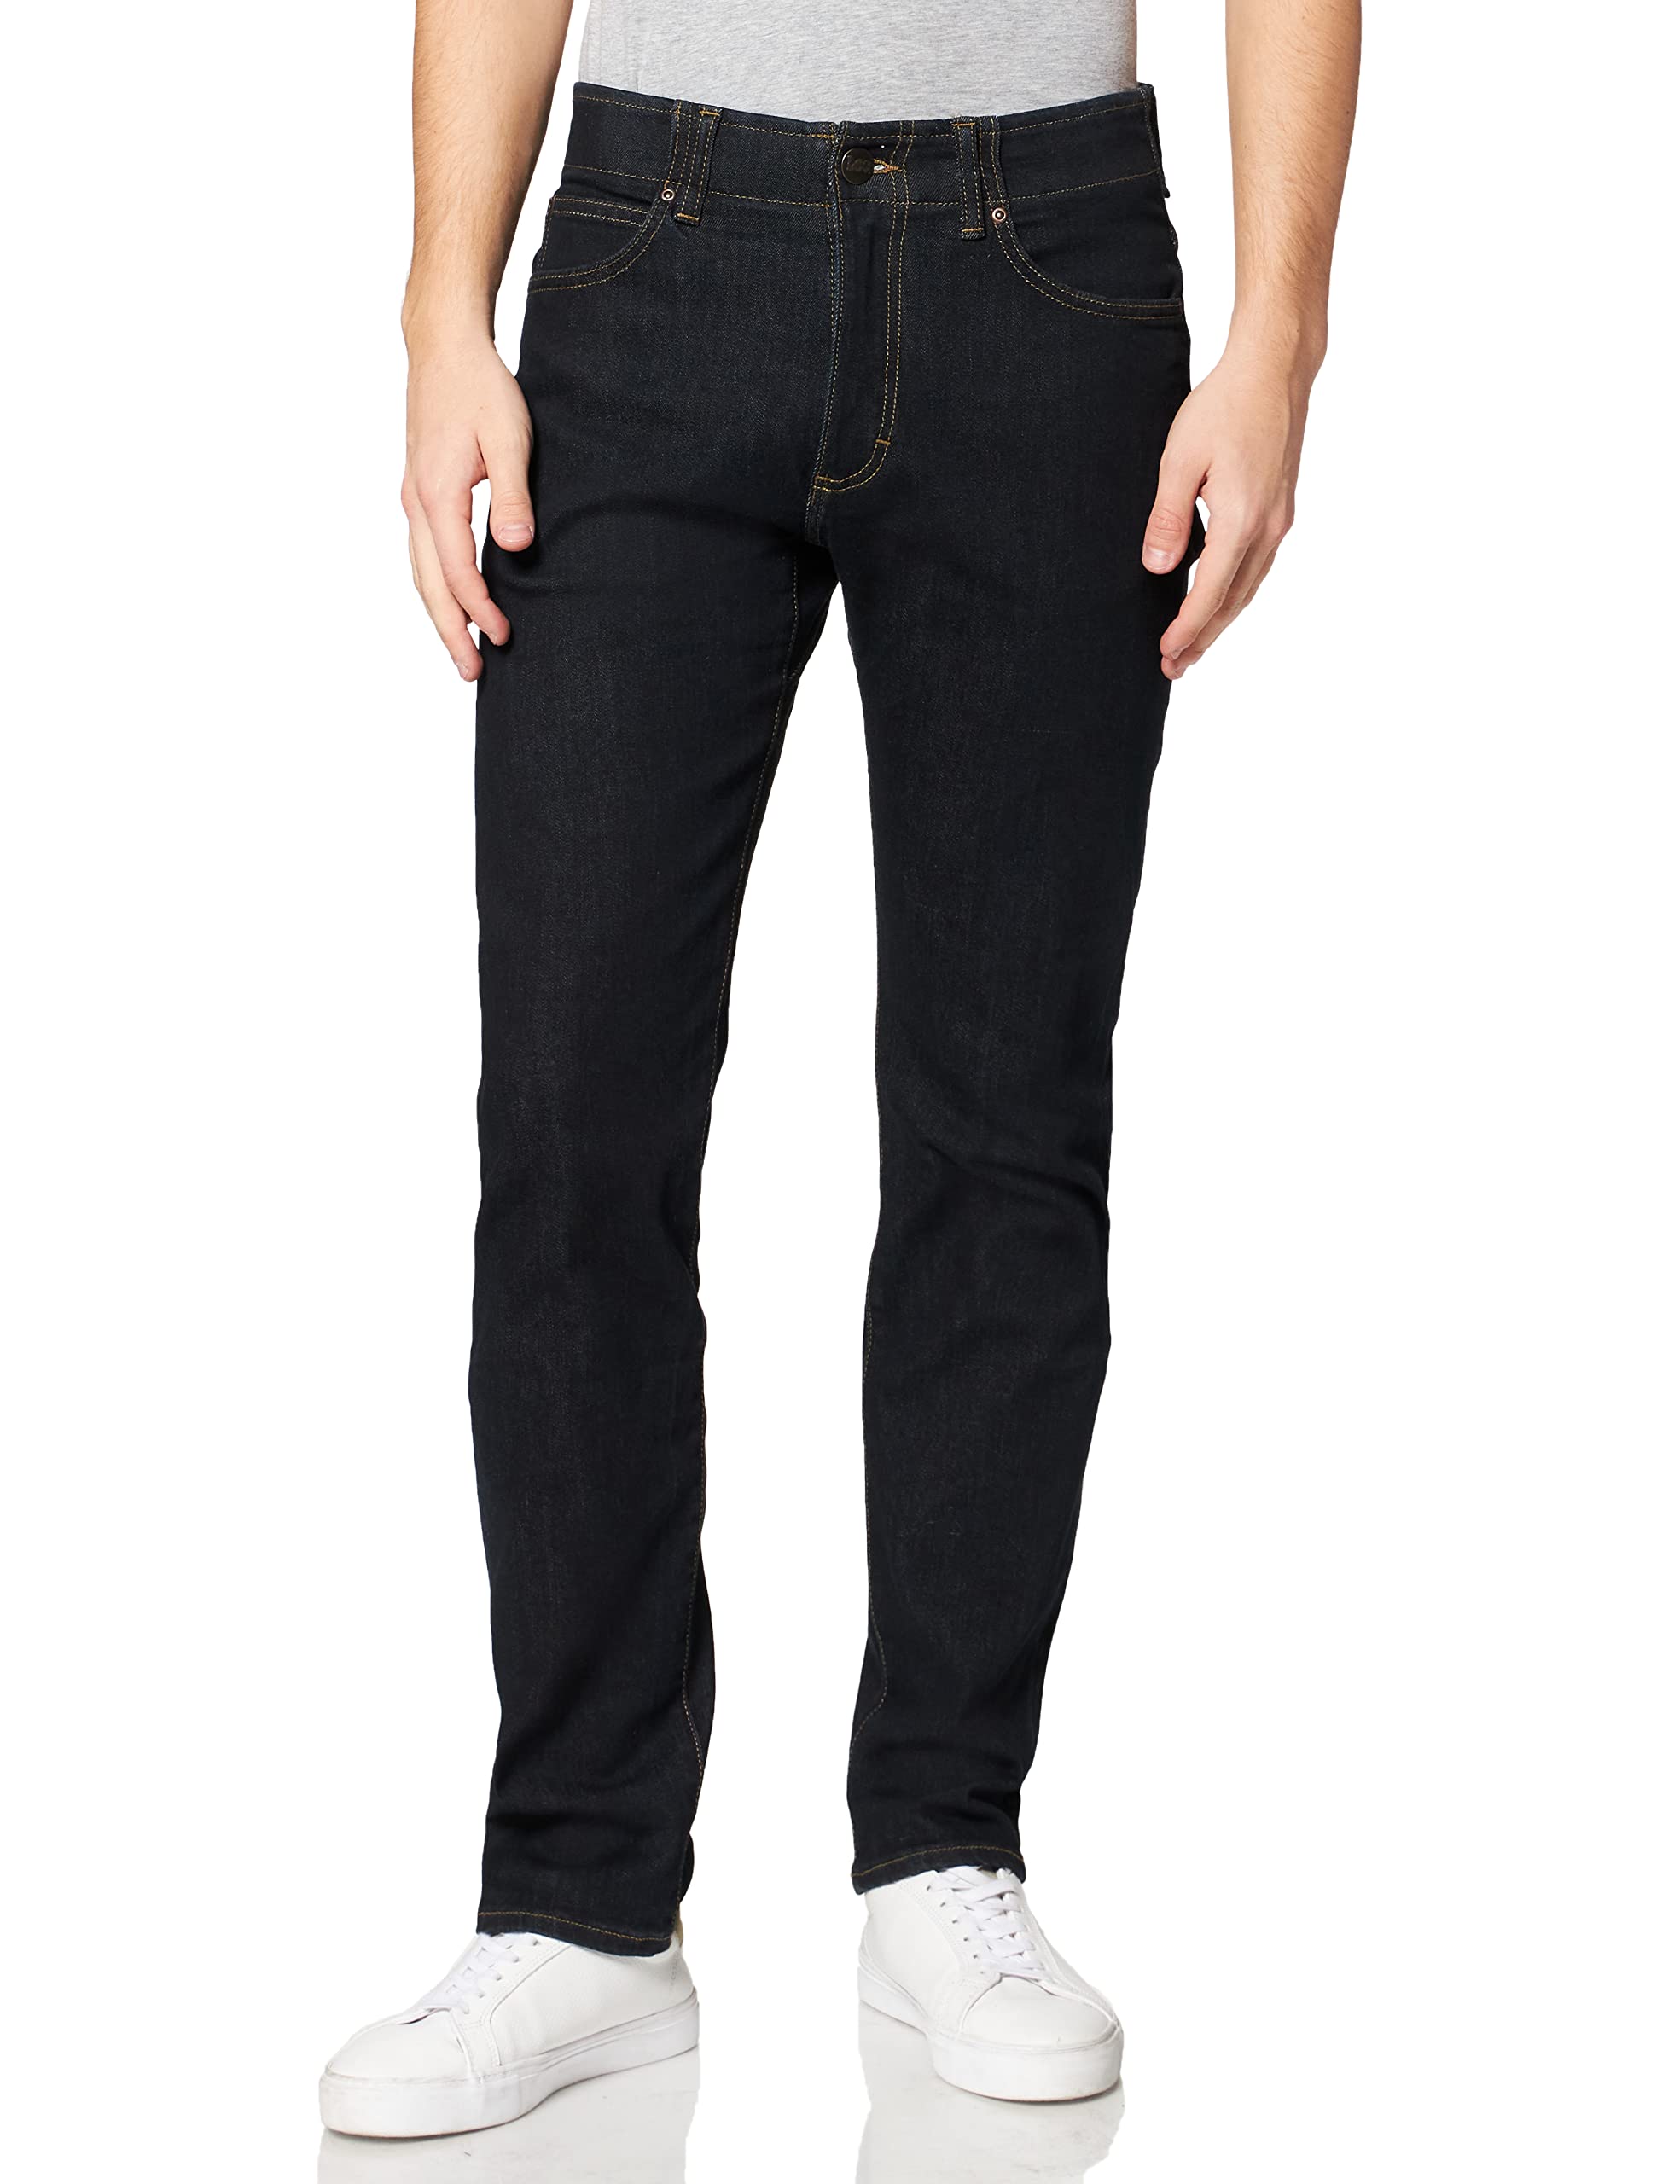 Lee Herren Extreme Motion Jeans, RINSE, 30W / 34L